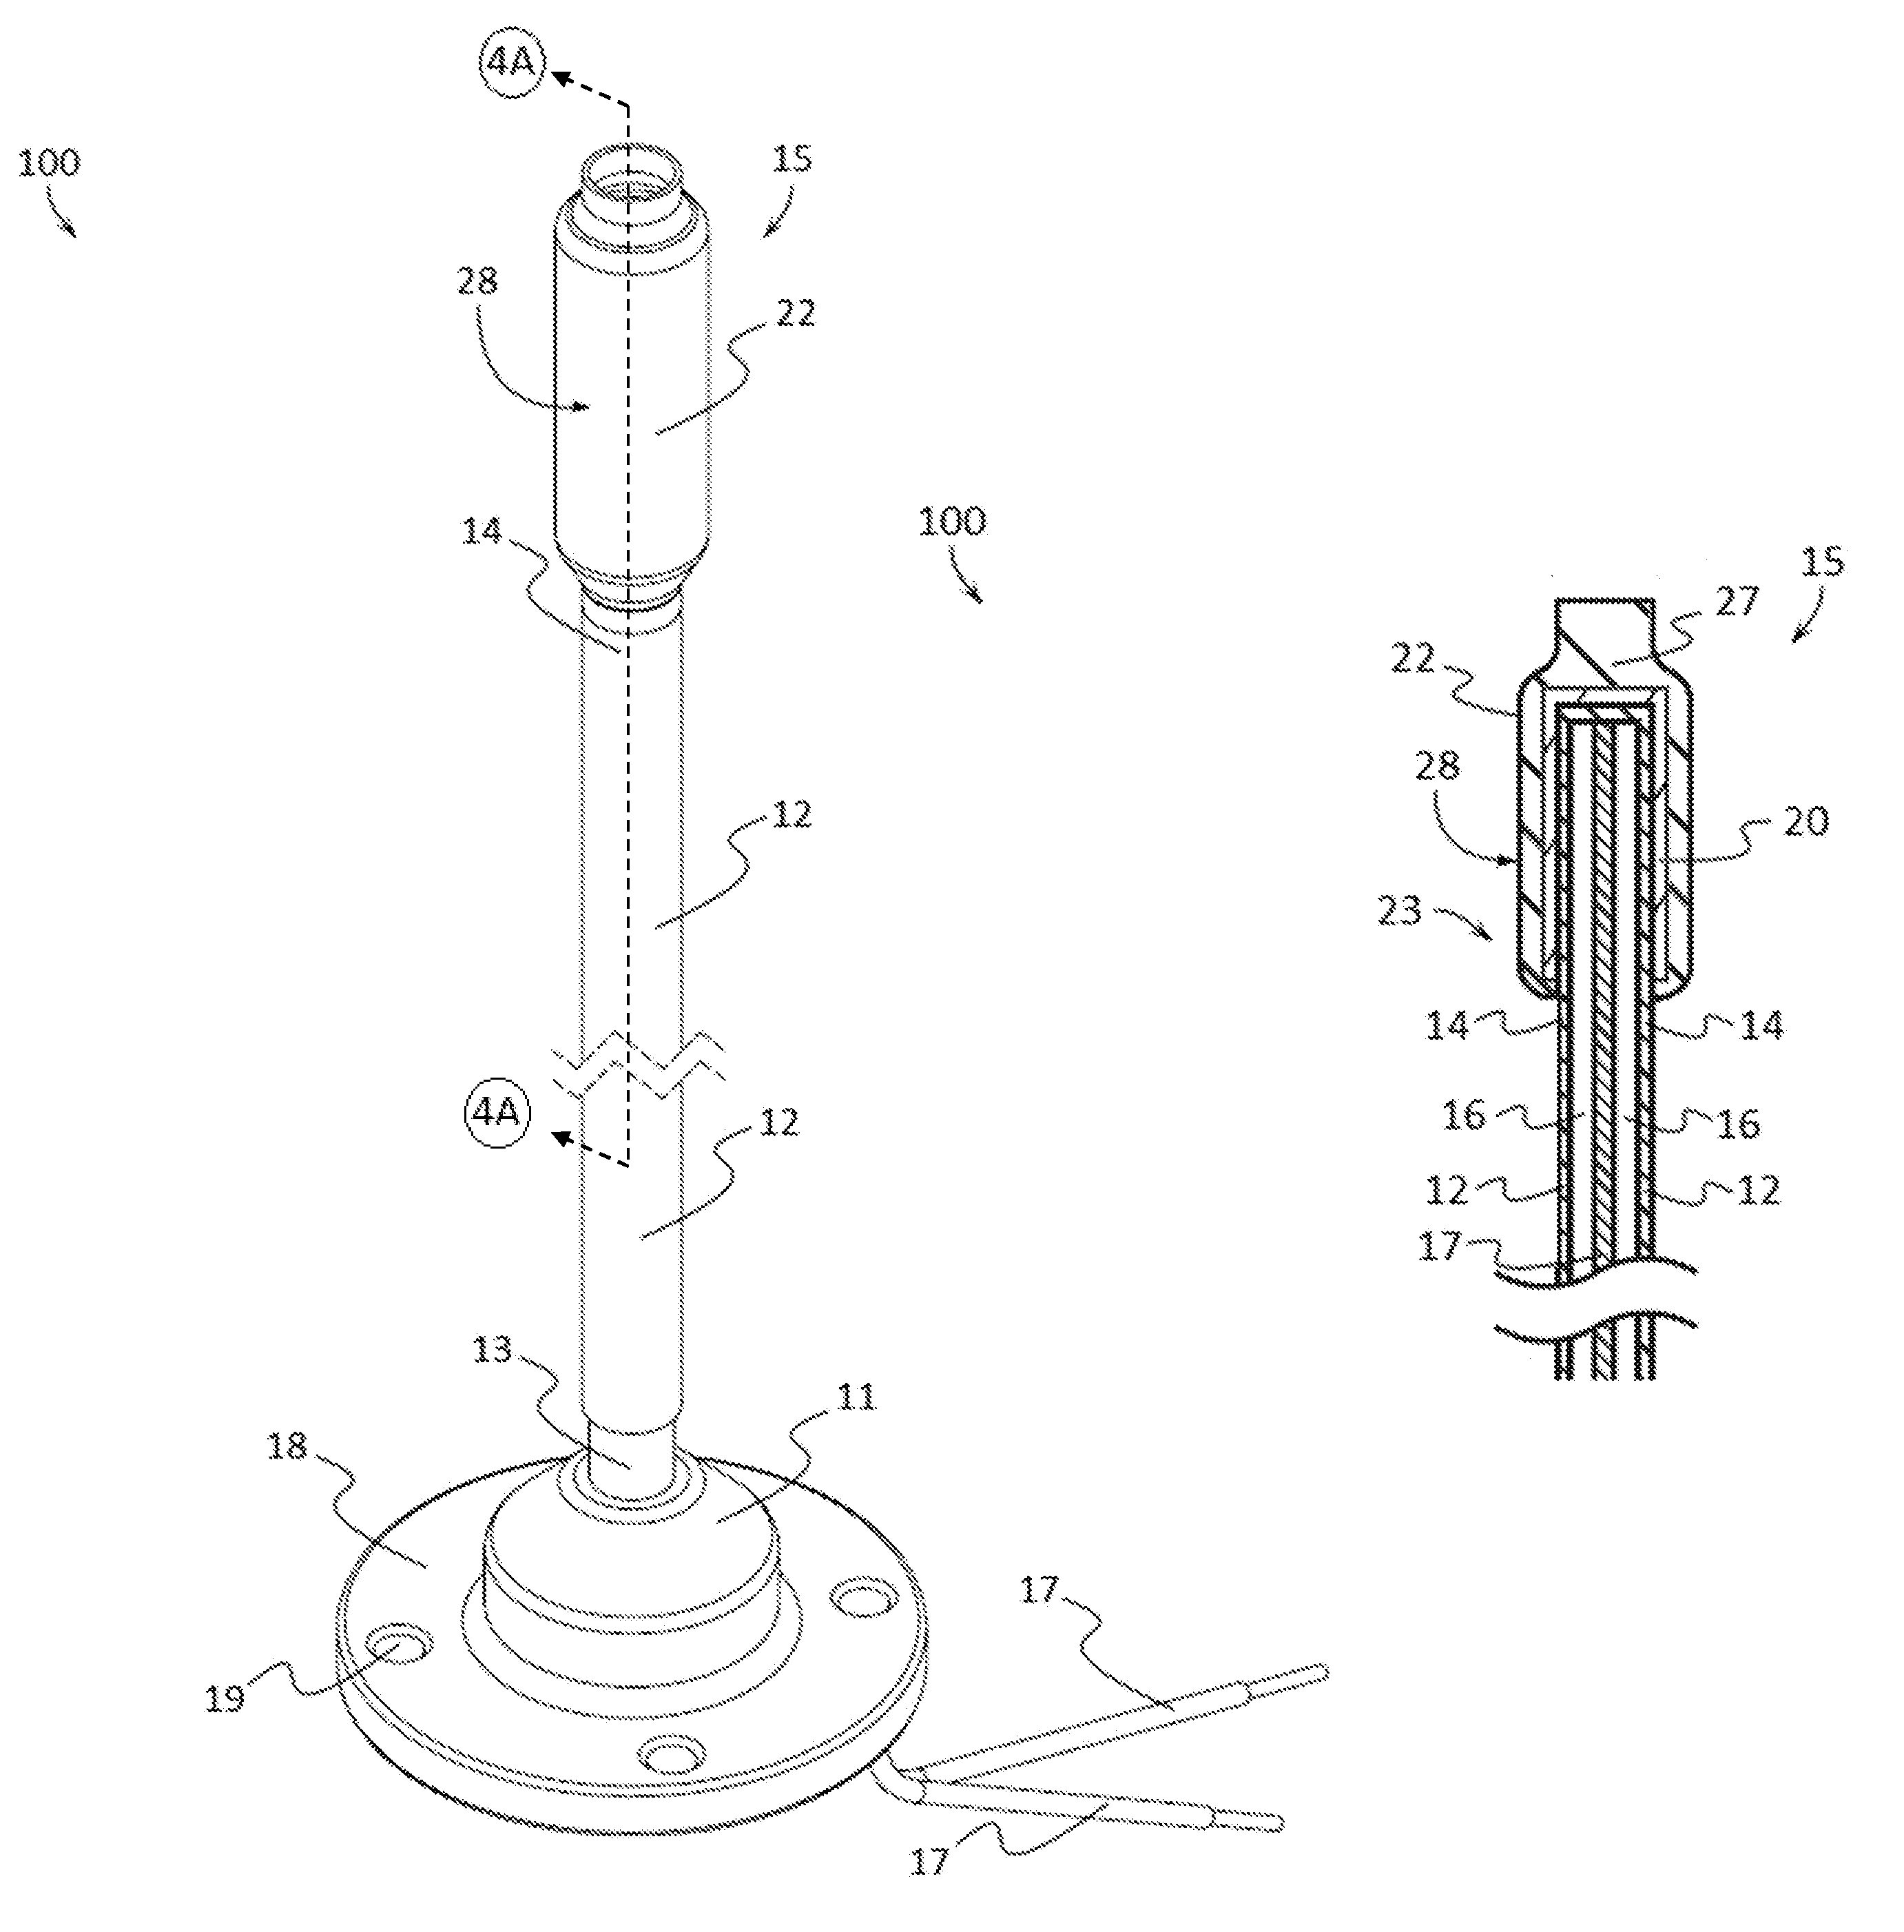 Marine navigation light apparatuses and methods of making the same